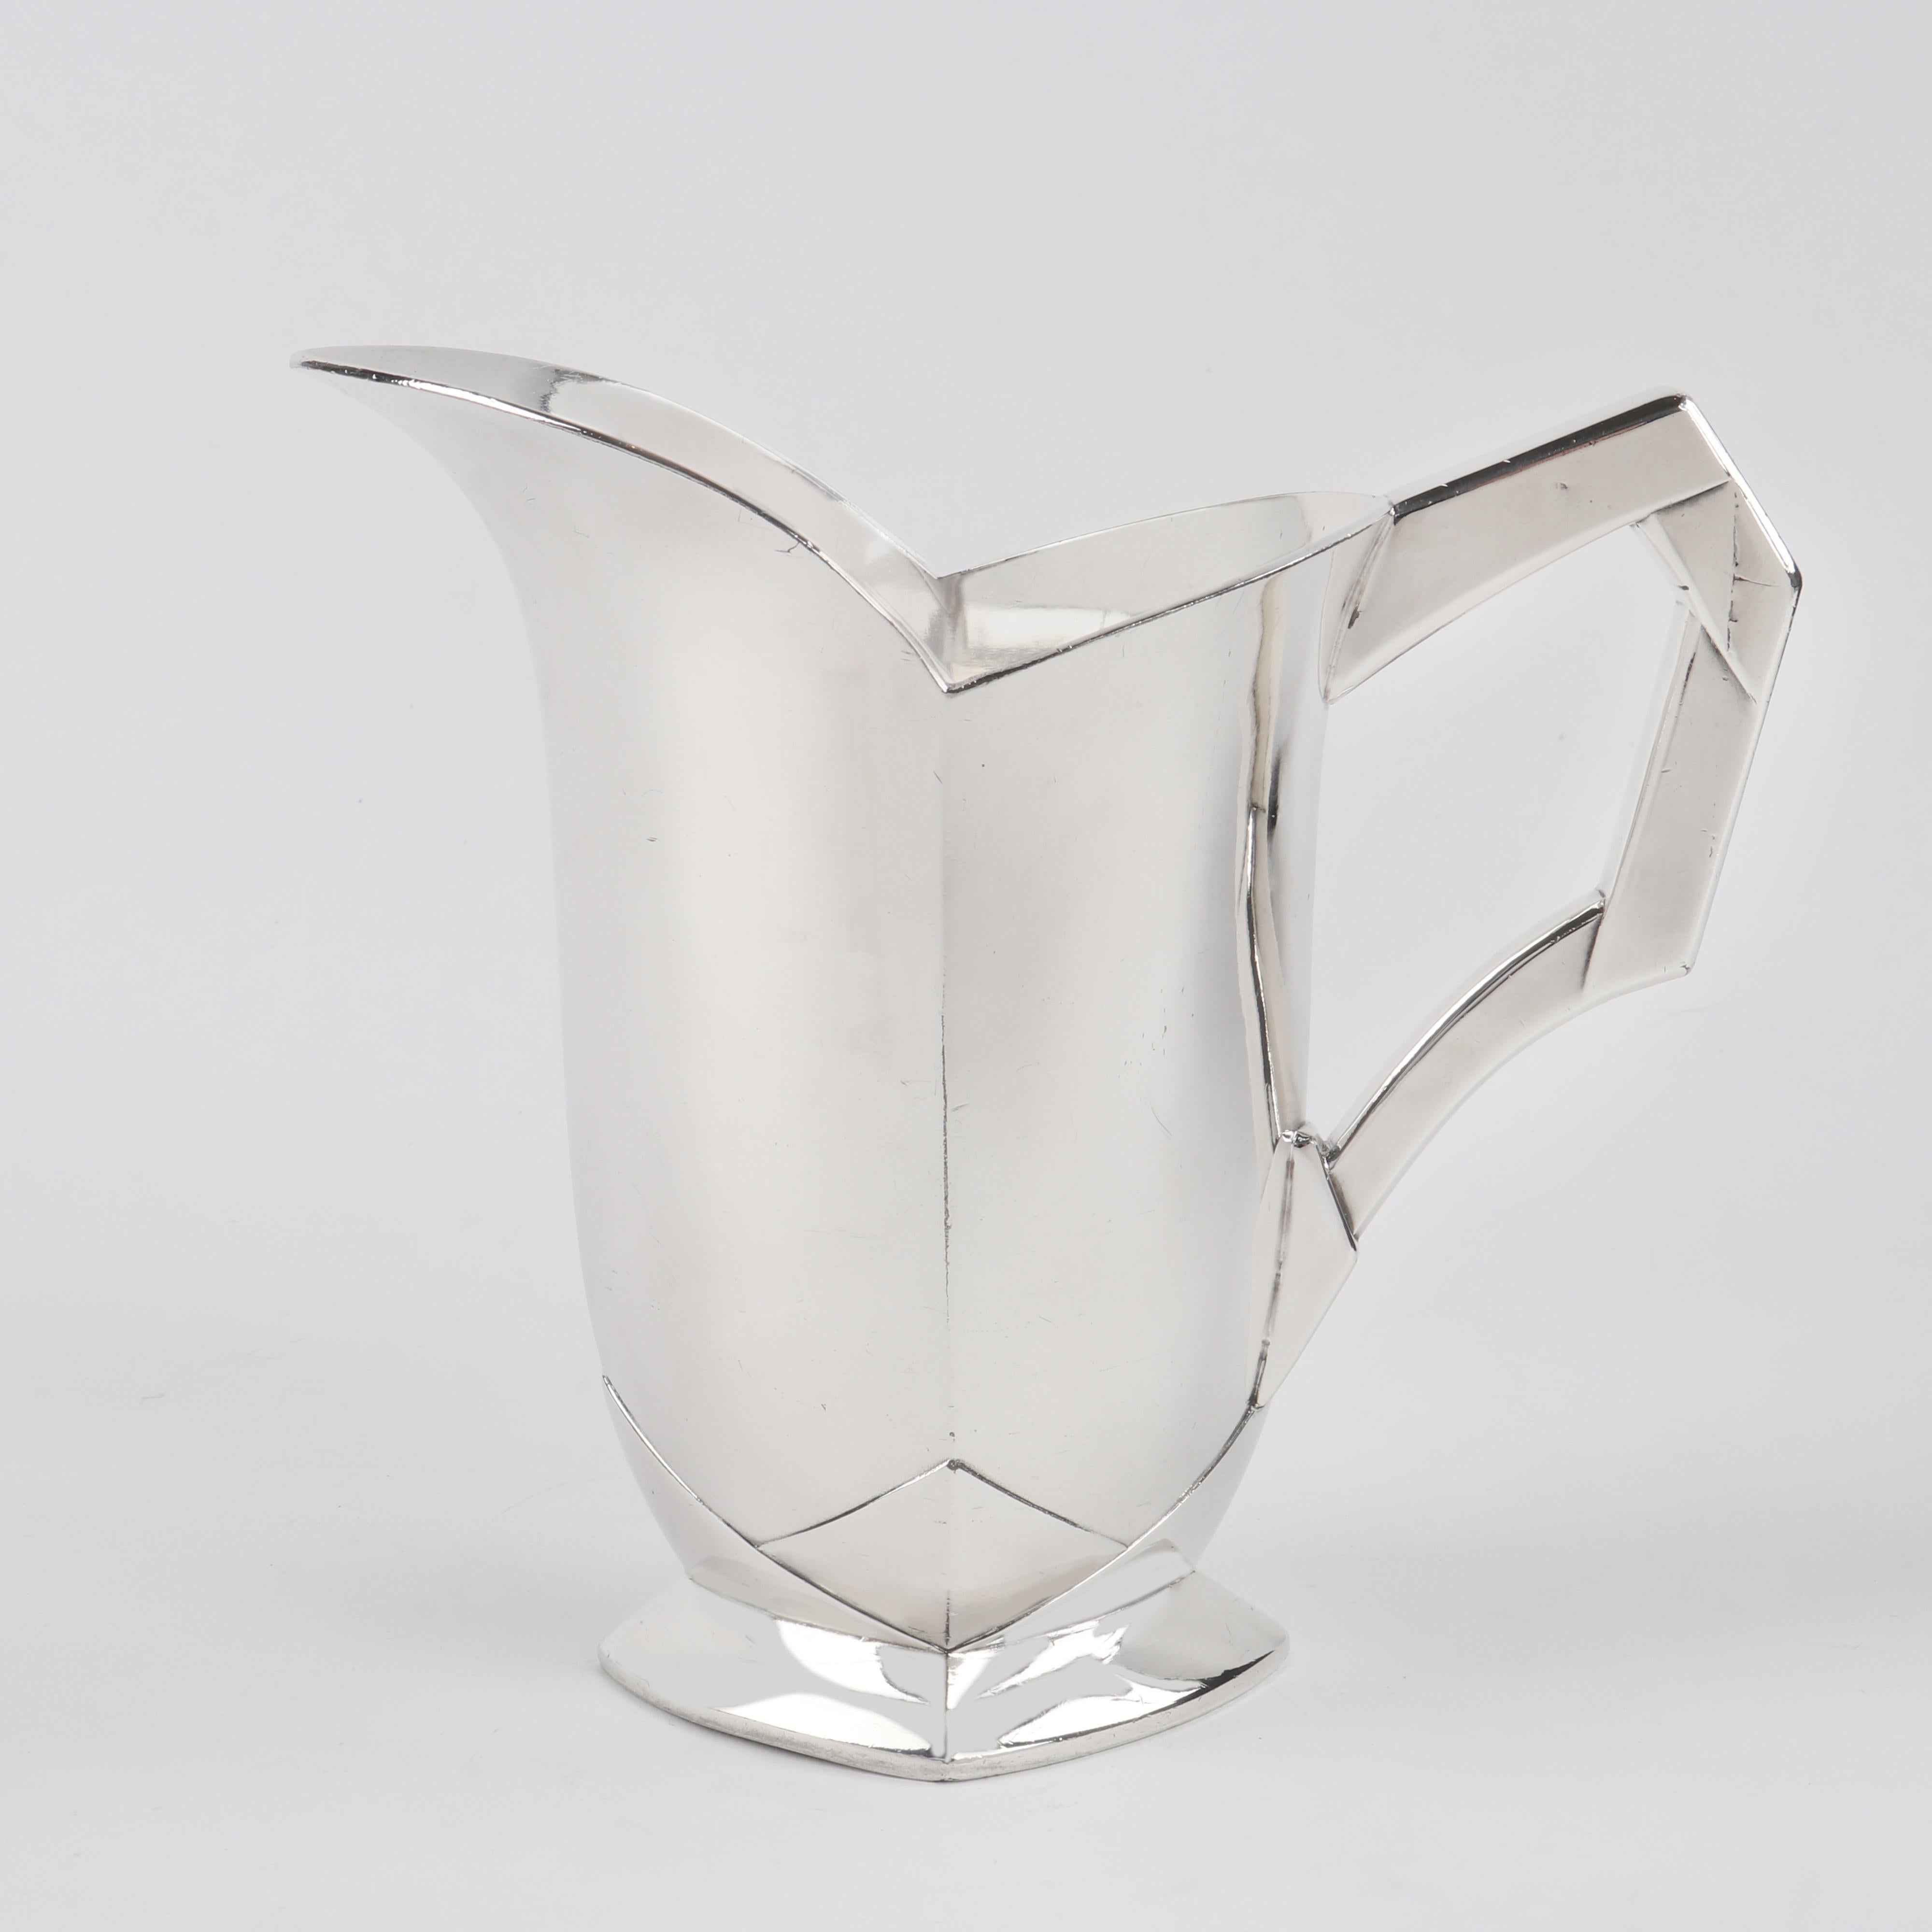 Elegant Art Deco metal water pitcher by Louis Süe (1875-1968) & André Mare (1887-1932) for Gallia - Christofle. Silver-plated. Stamped underneath 